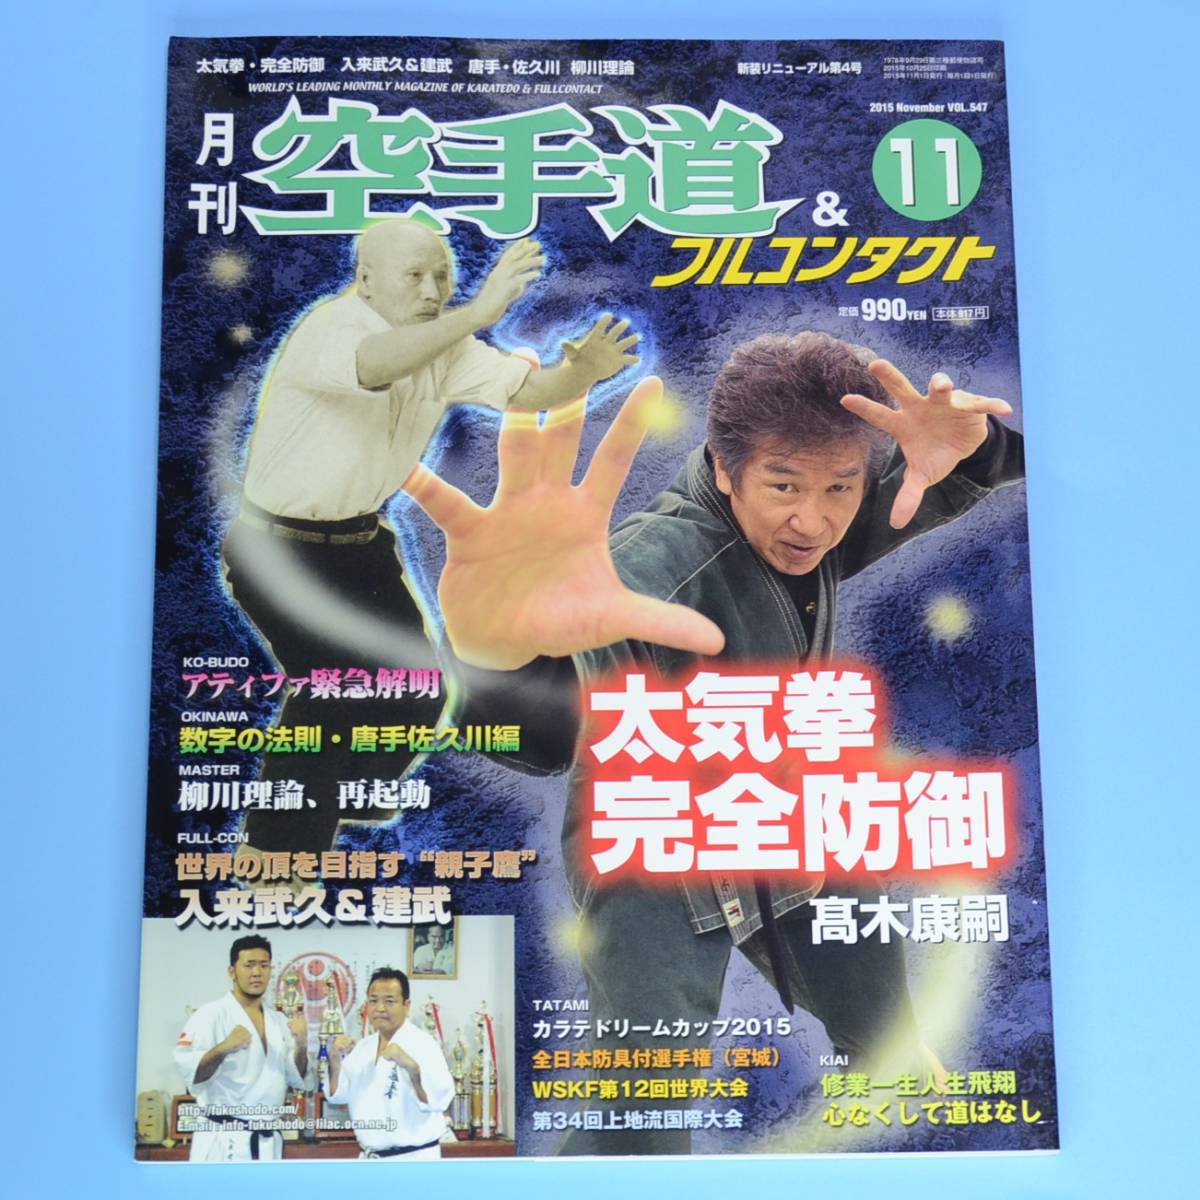  month interval karate road & full Contact 2015 year 11 month number * monthly magazine * used book